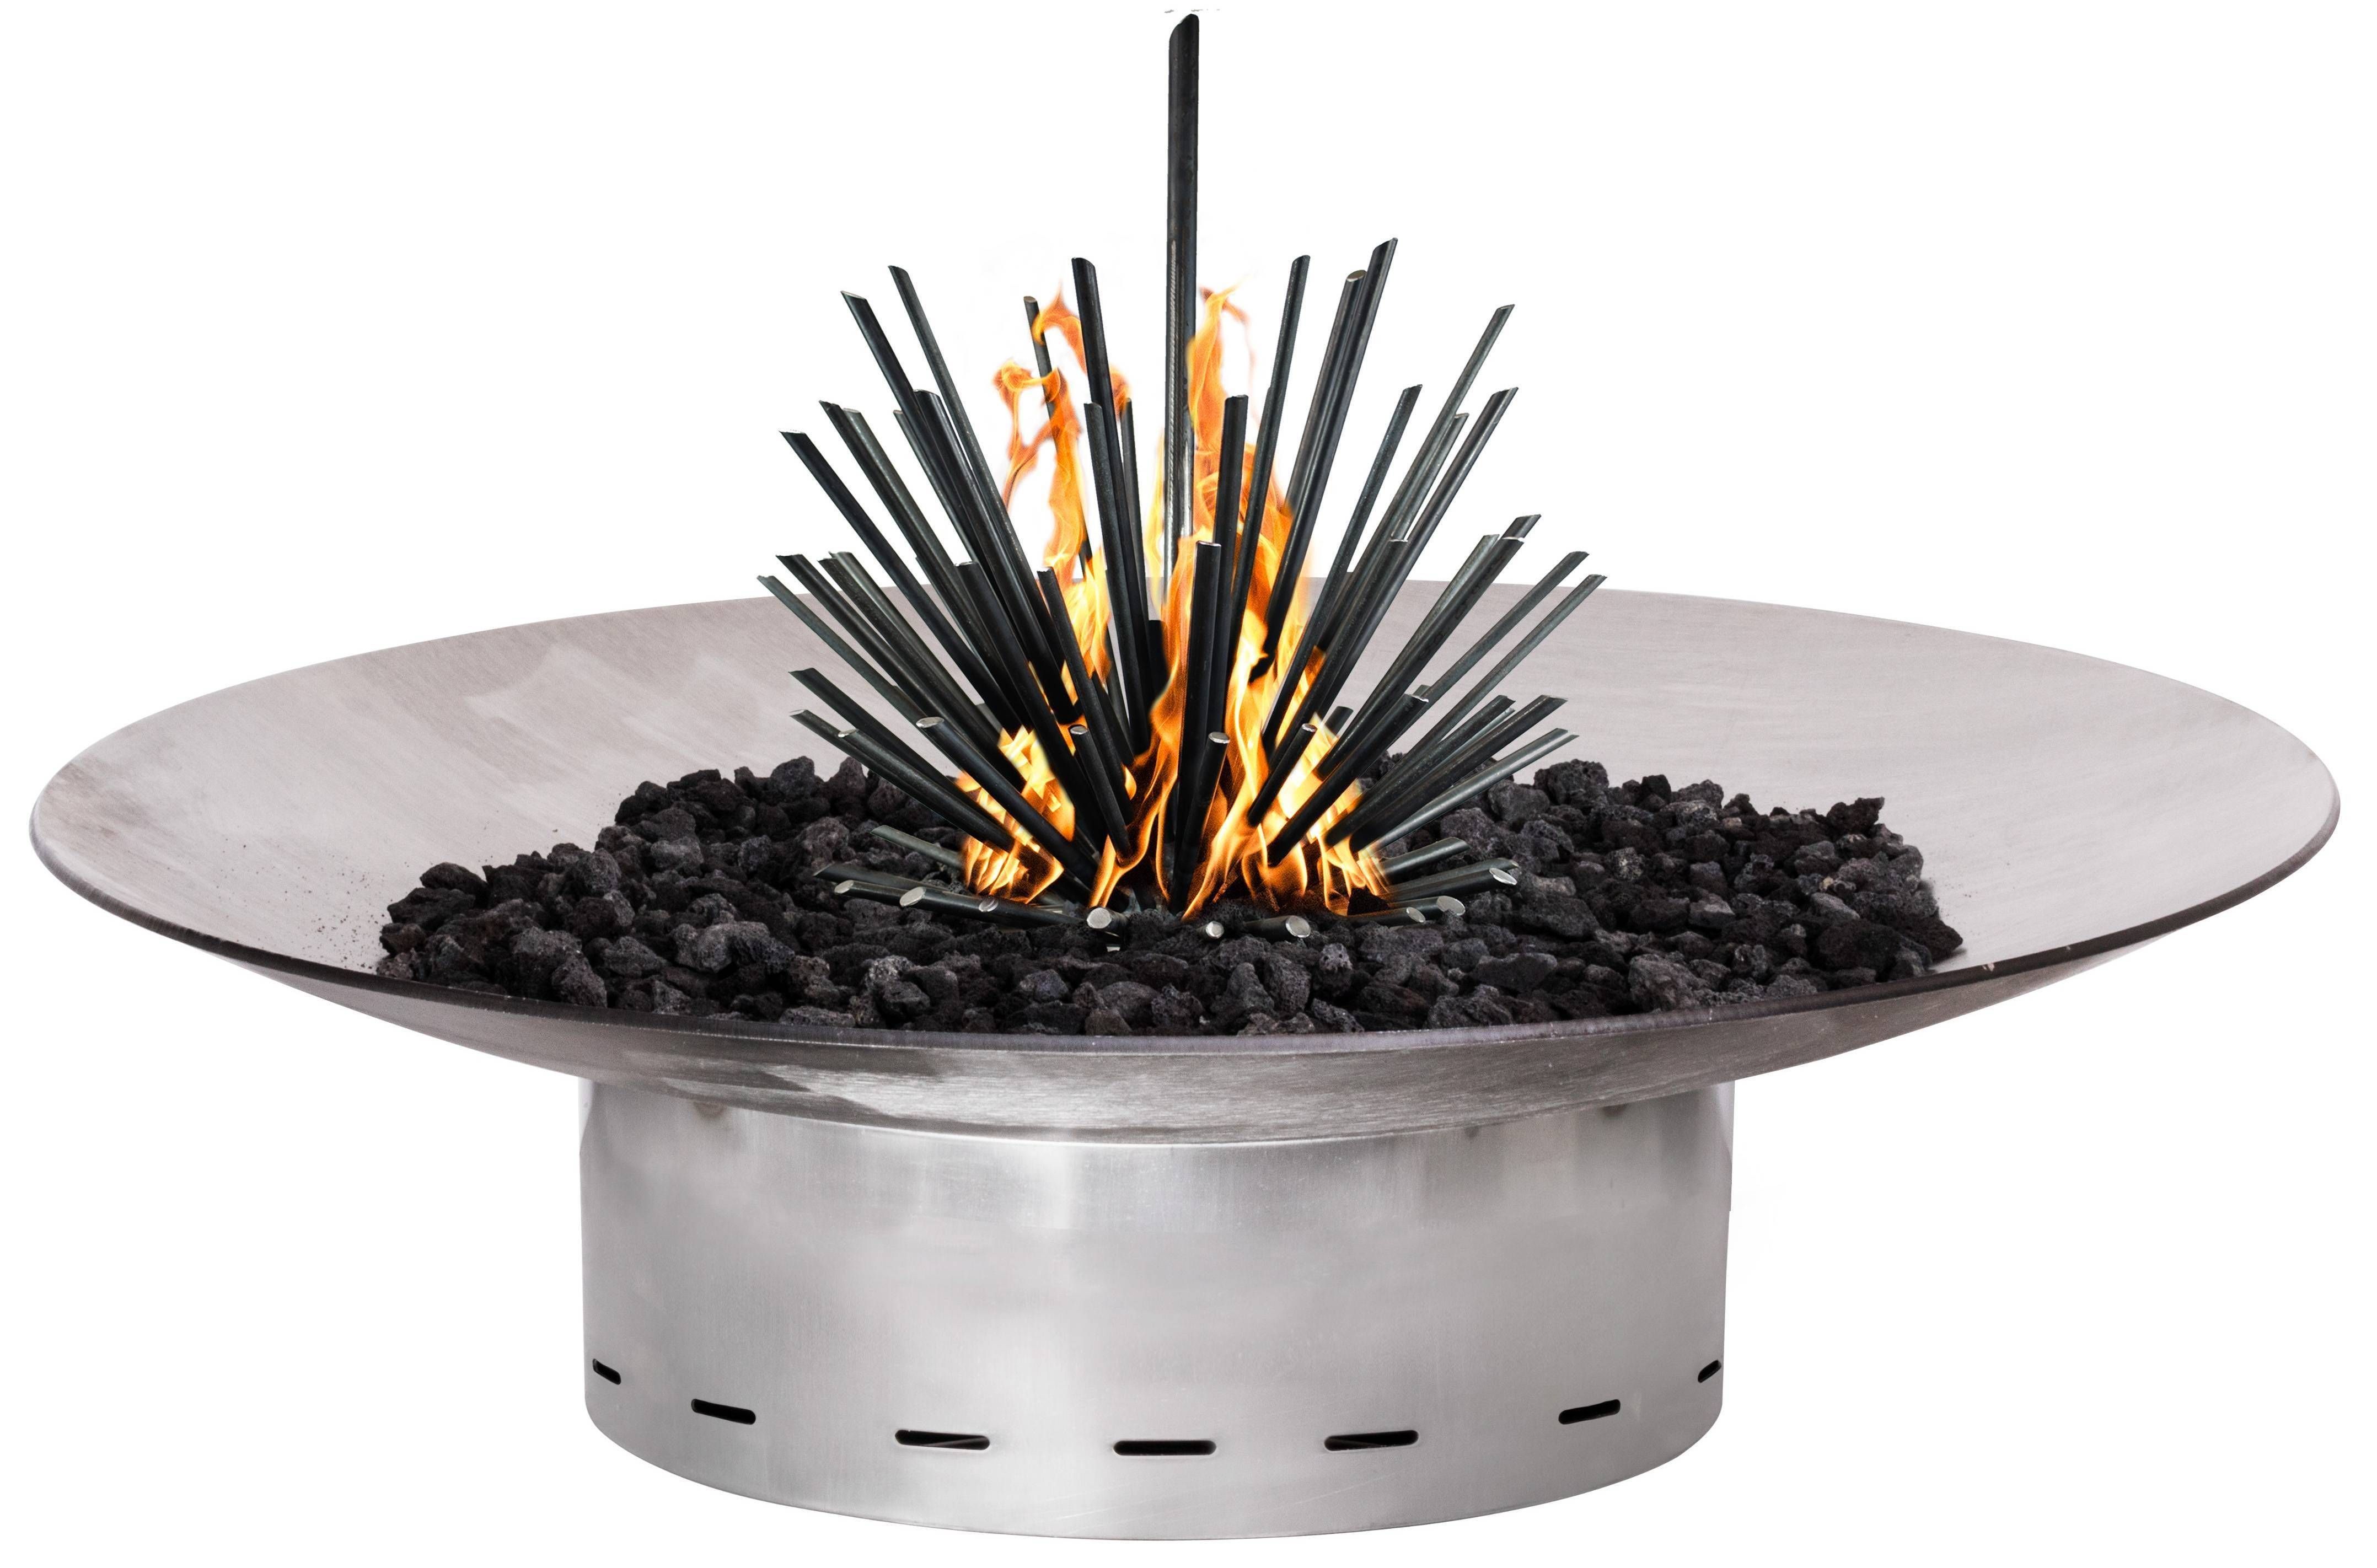 Lava Rock Fireplace Best Of Stainless Steel Fire Bowl Starting